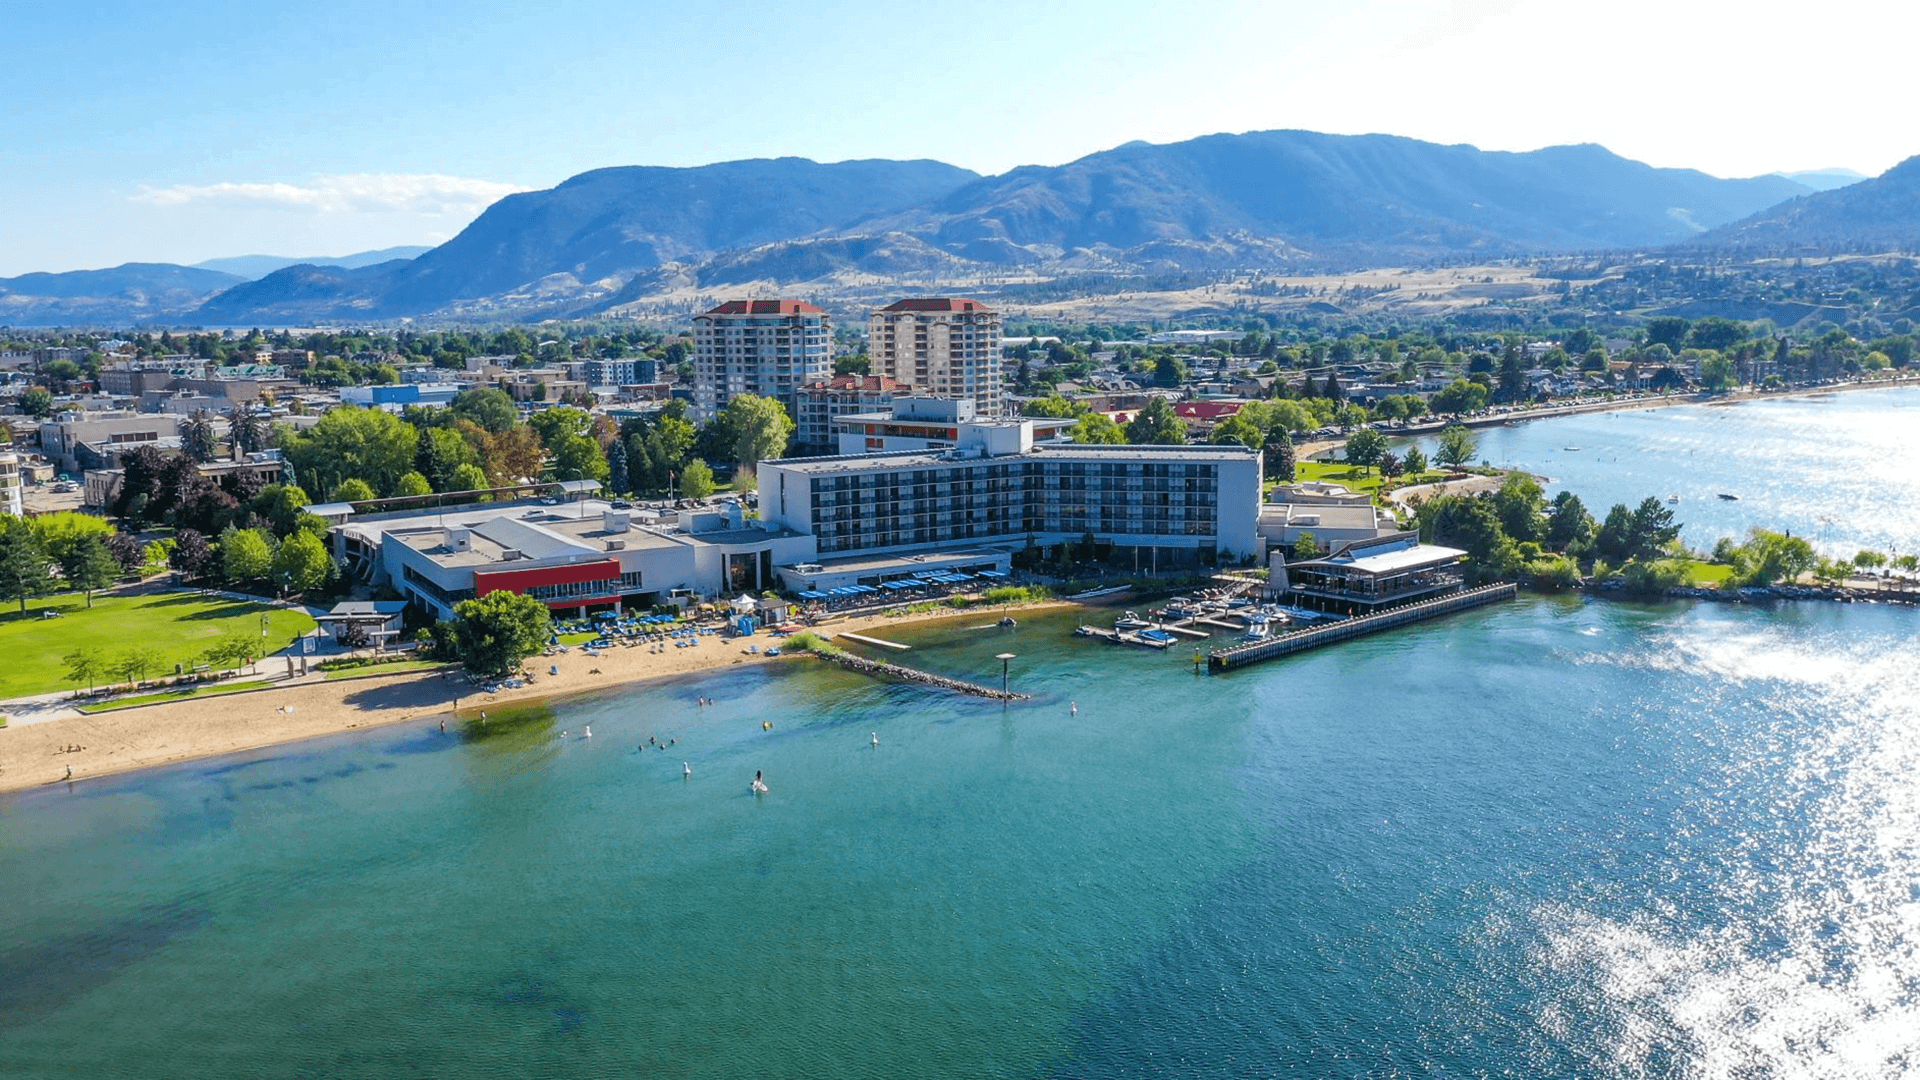 REACH Digital Signage to be Used at Penticton Lakeside Resort in British Columbia